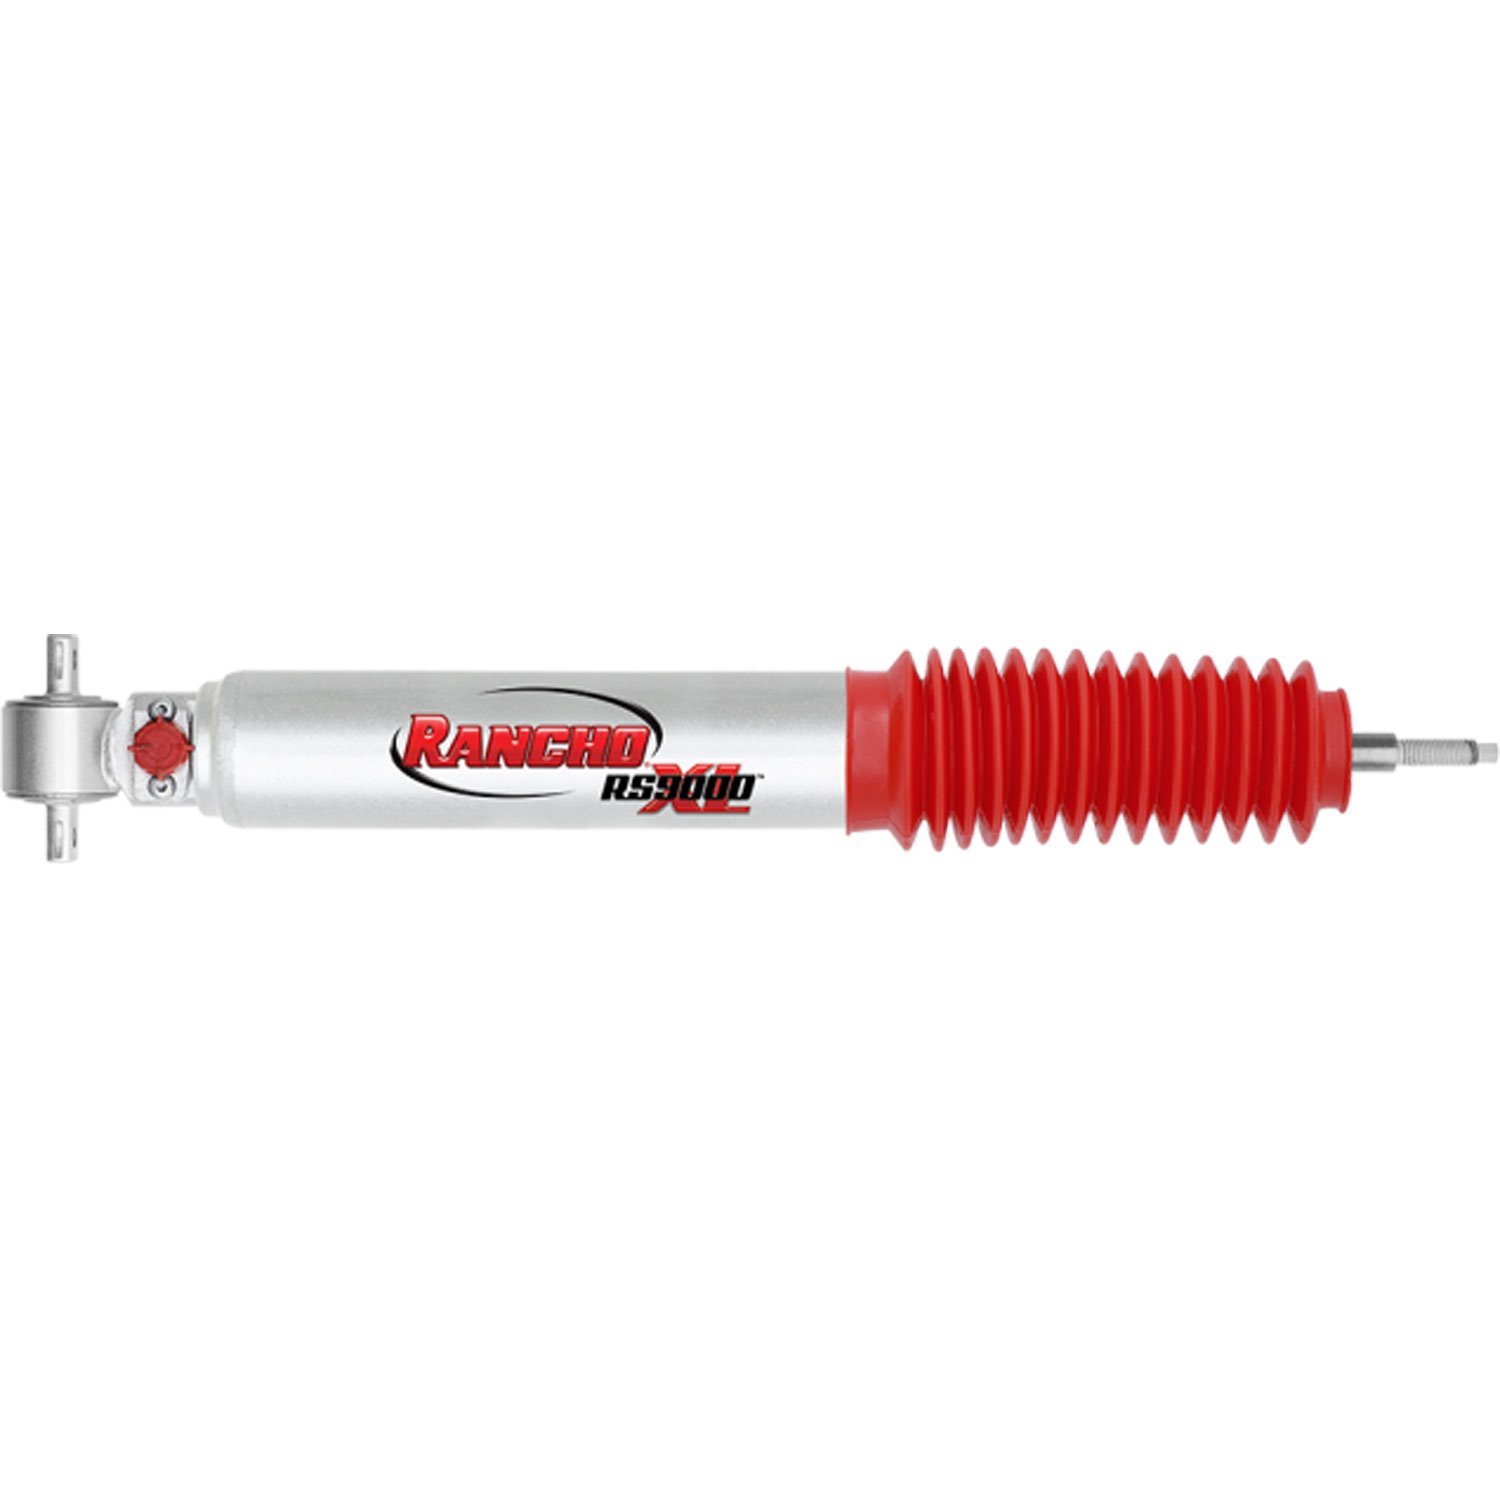 RS9000XL Front Shock Absorber Fits Jeep Cherokee, Comanche, Grand Cherokee and Wrangler TJ